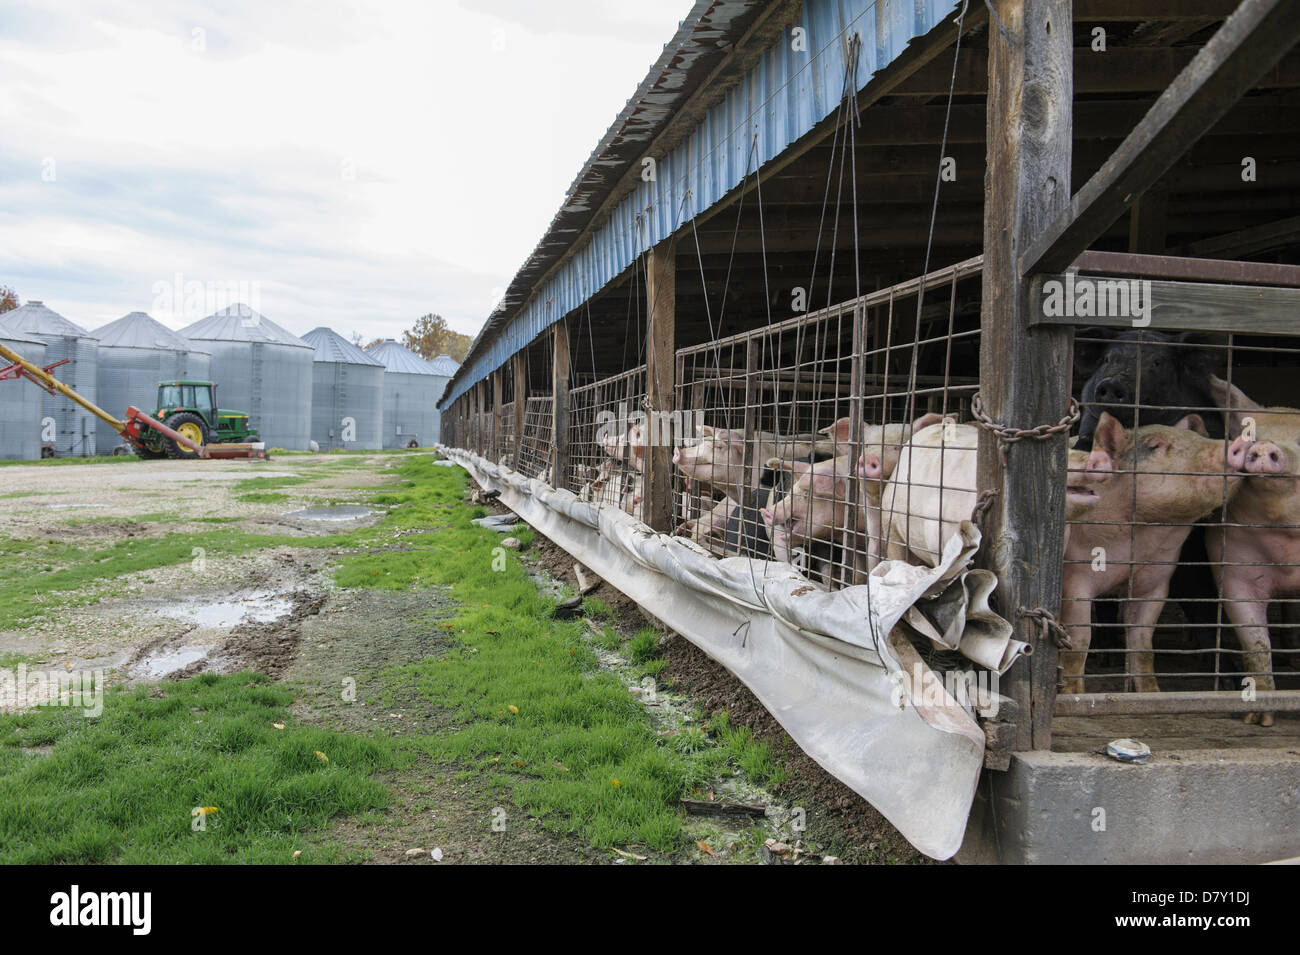 Pigs in enclosure on farm Stock Photo